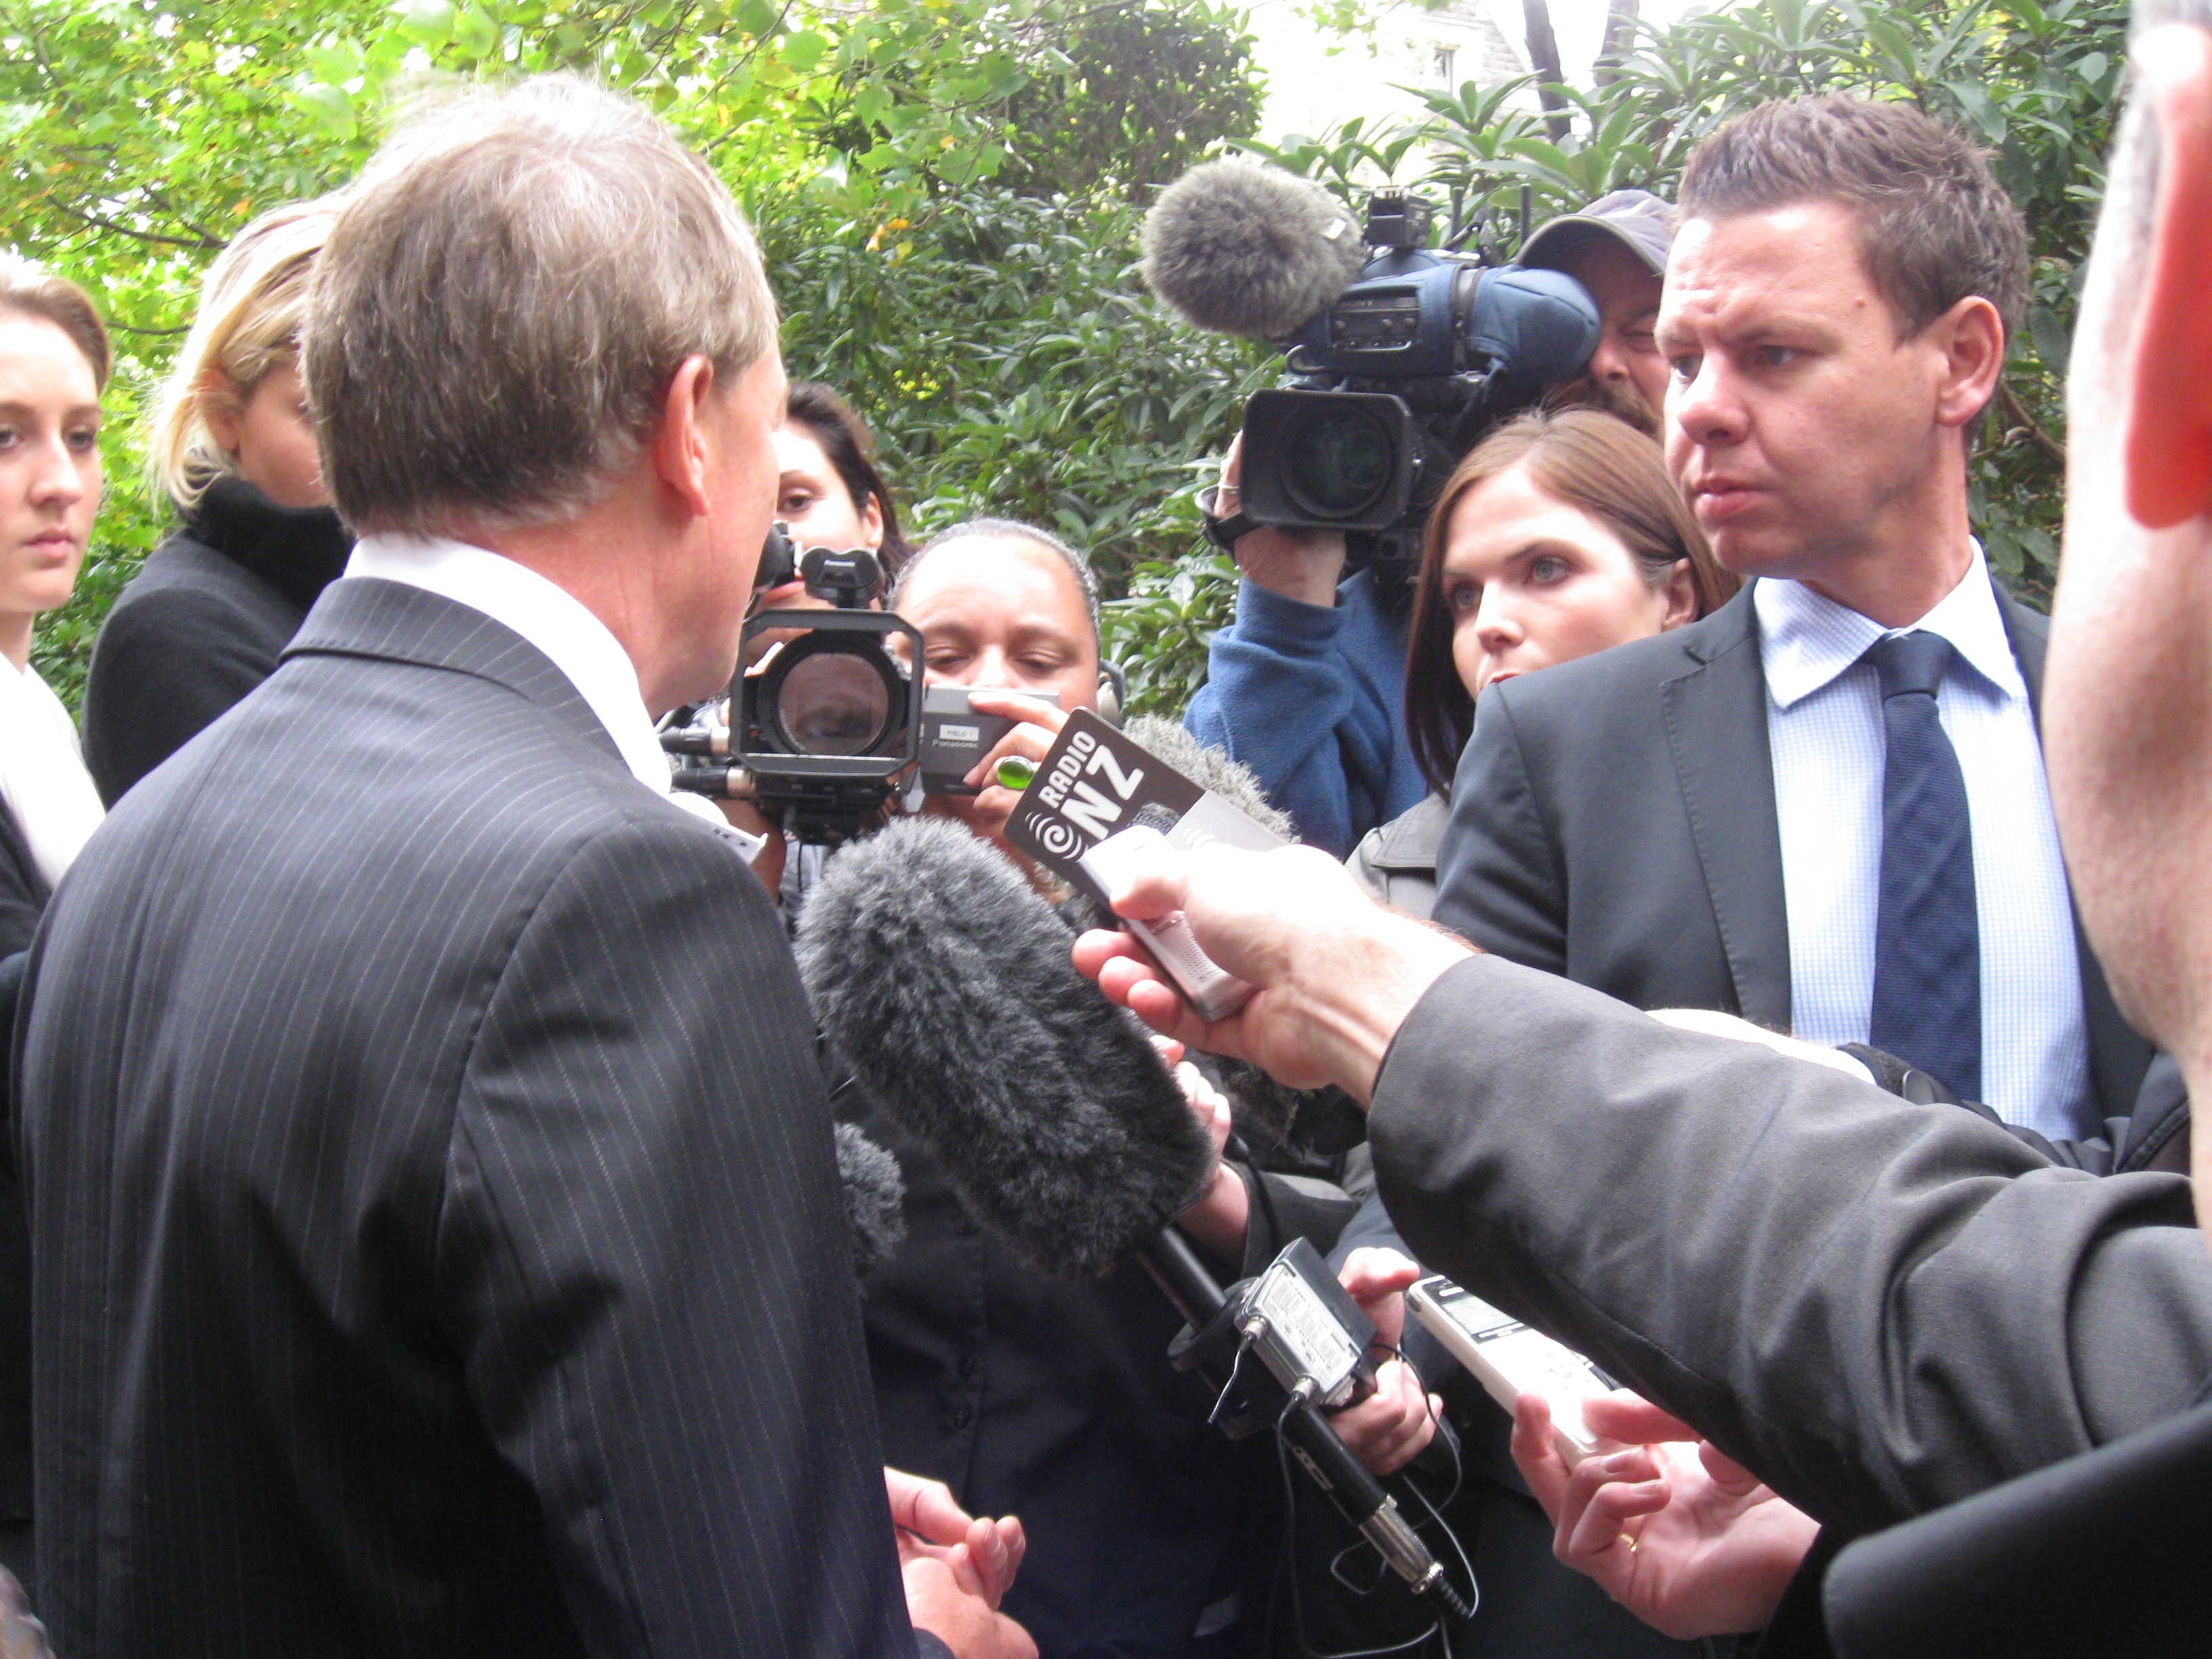 TV3 political editor and then Labour leader Phil Goff, 2011 (original image)